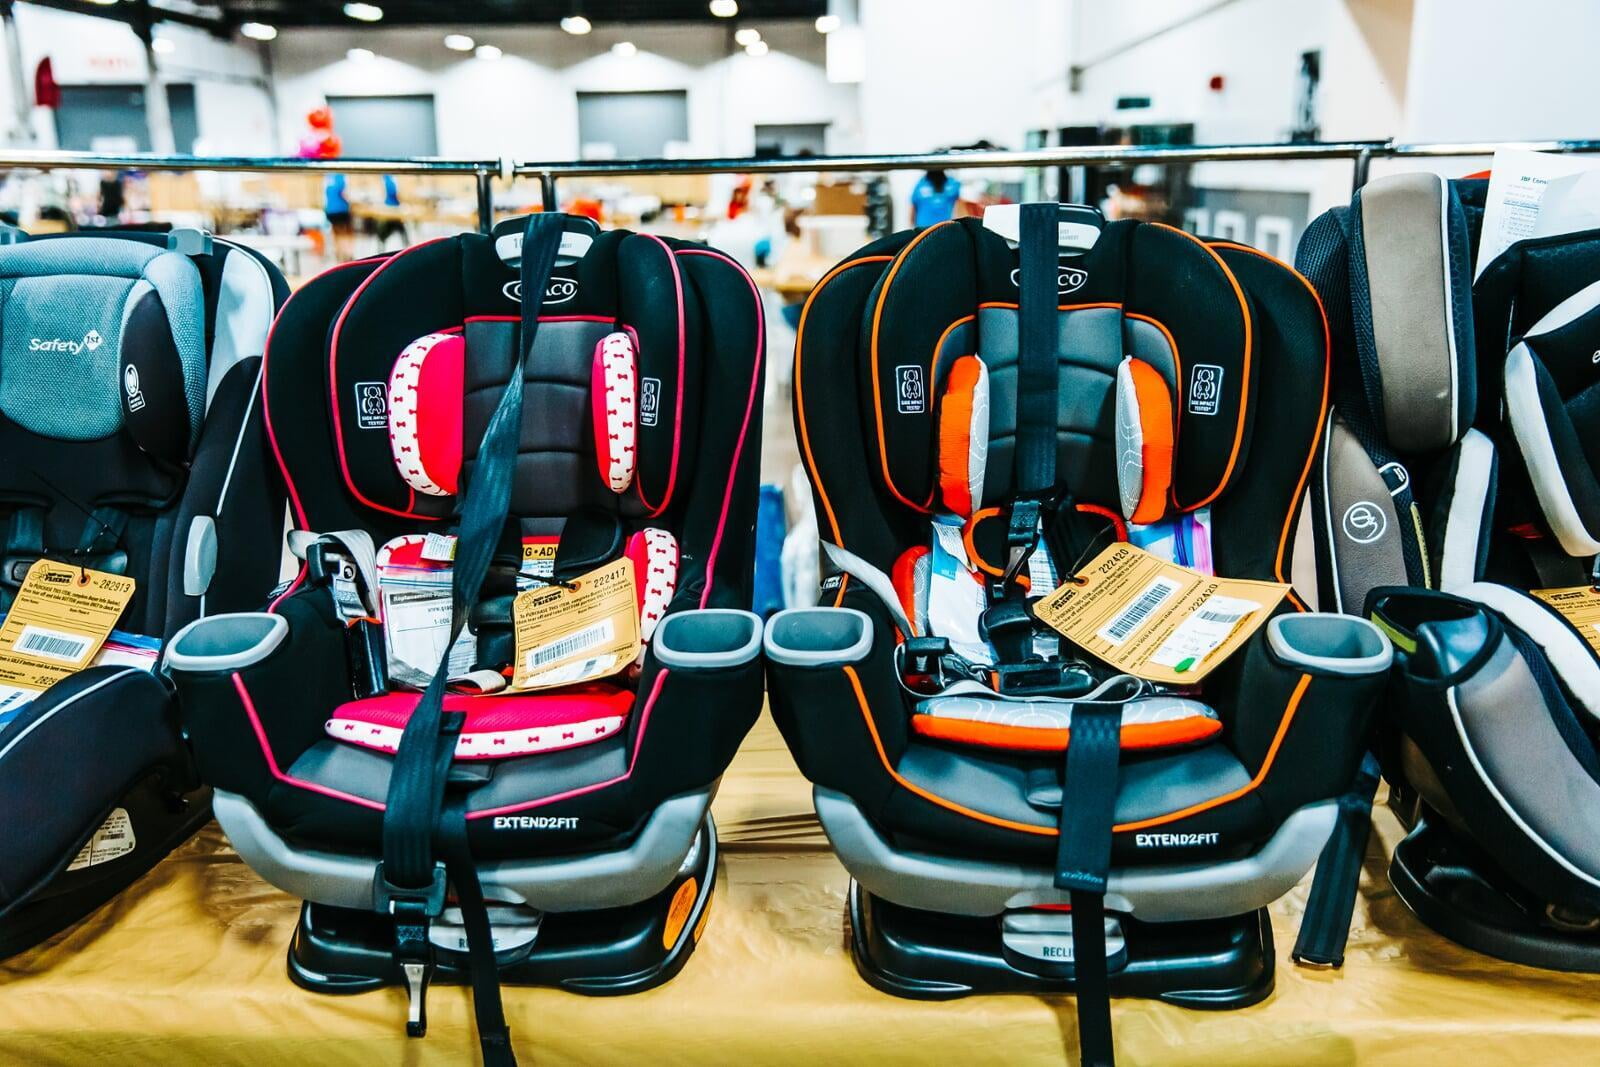 Variety of carseats displayed on the floor